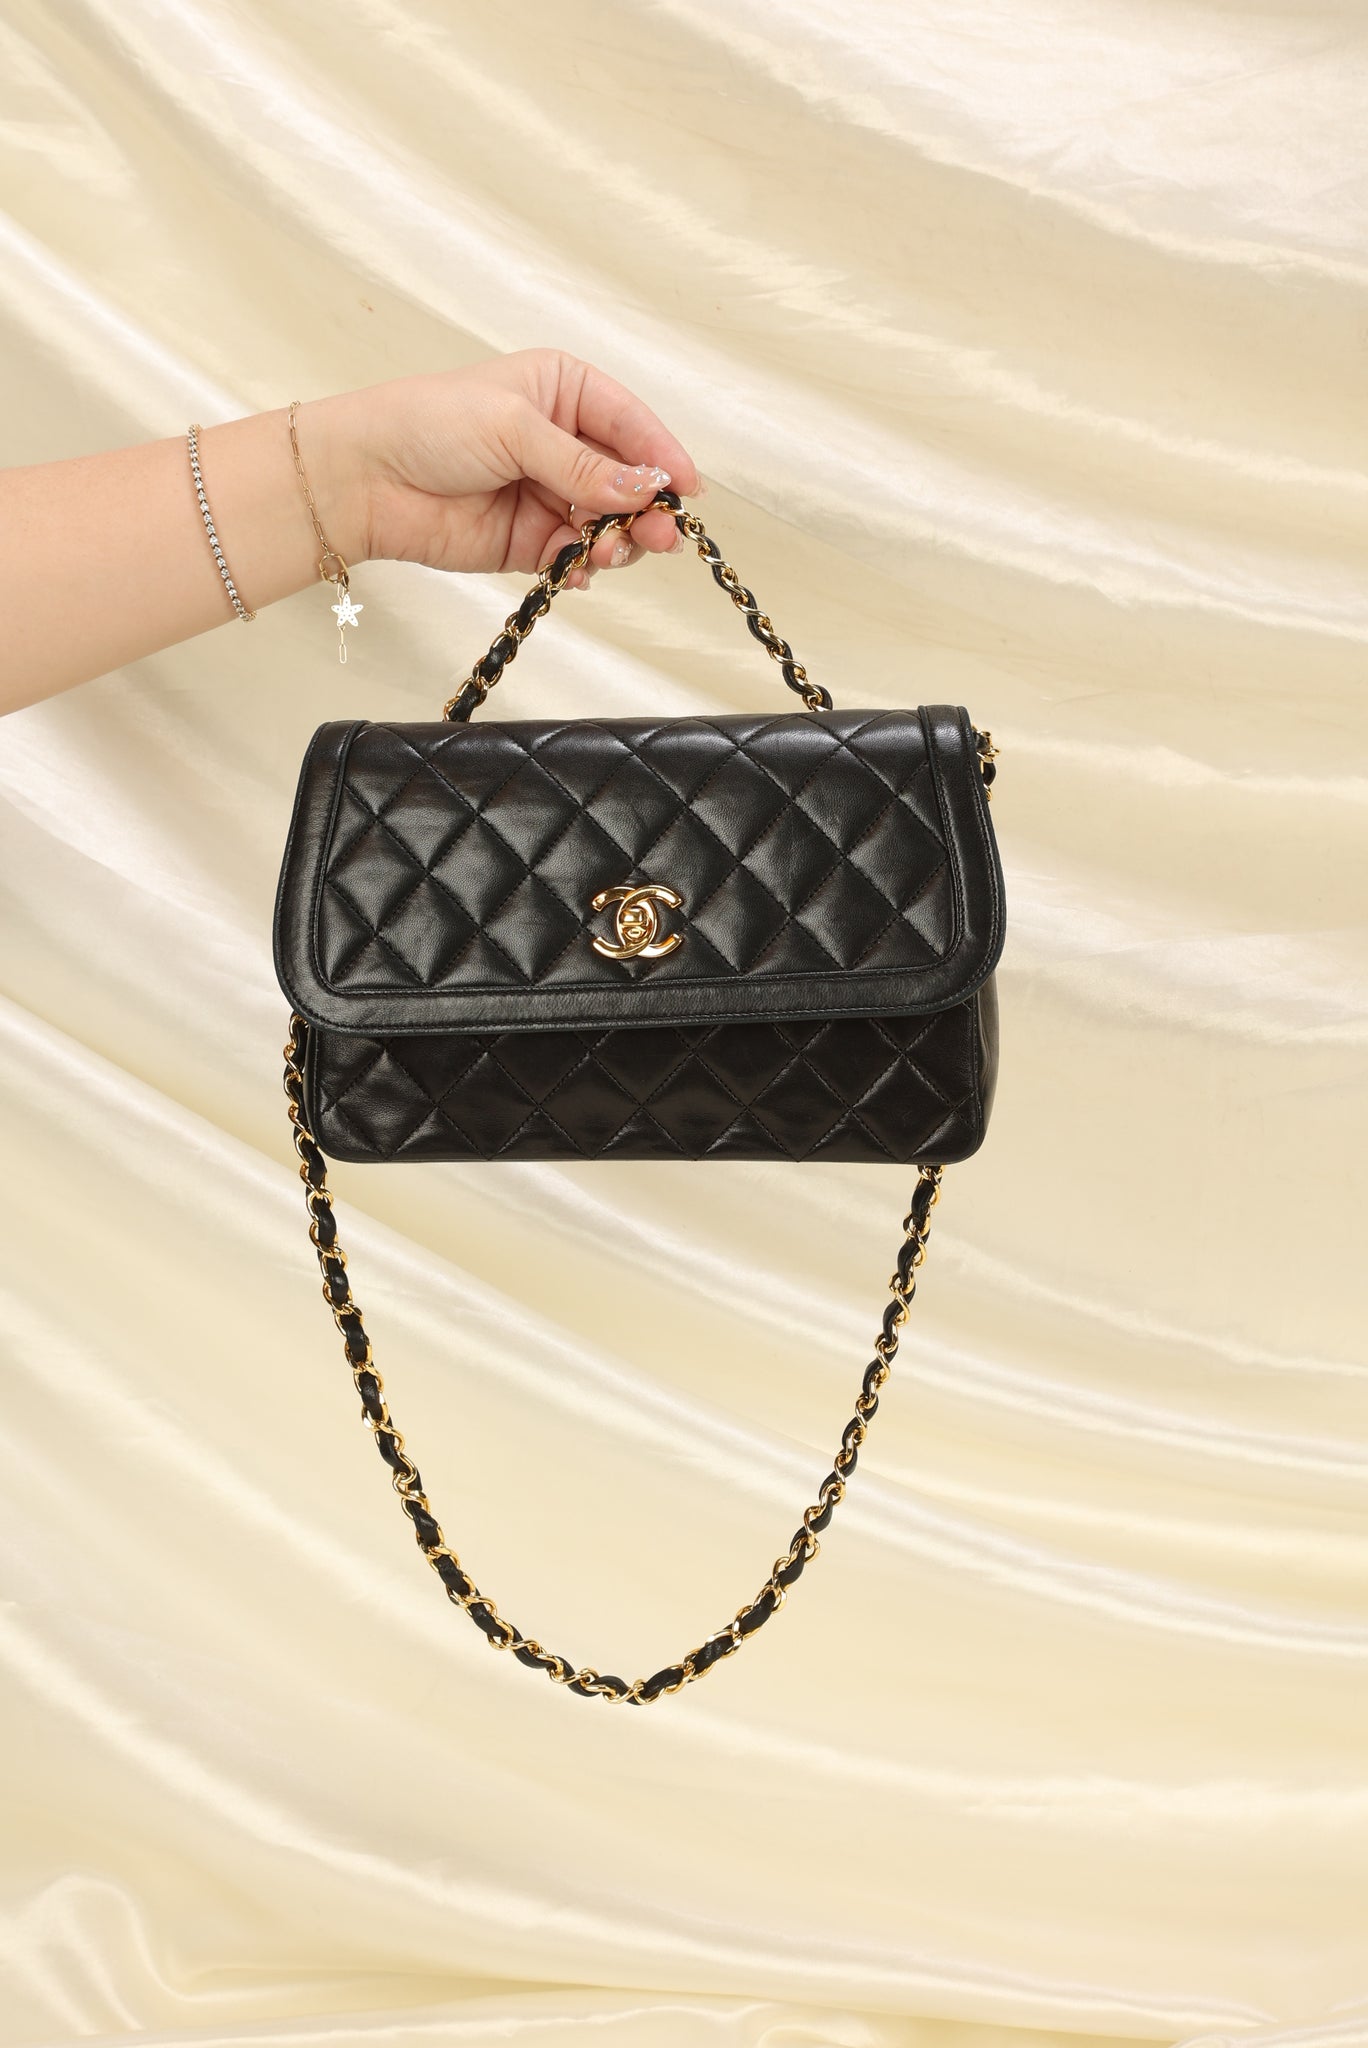 CHANEL Turn Lock Bags & Women's Leather Exterior, Authenticity Guaranteed